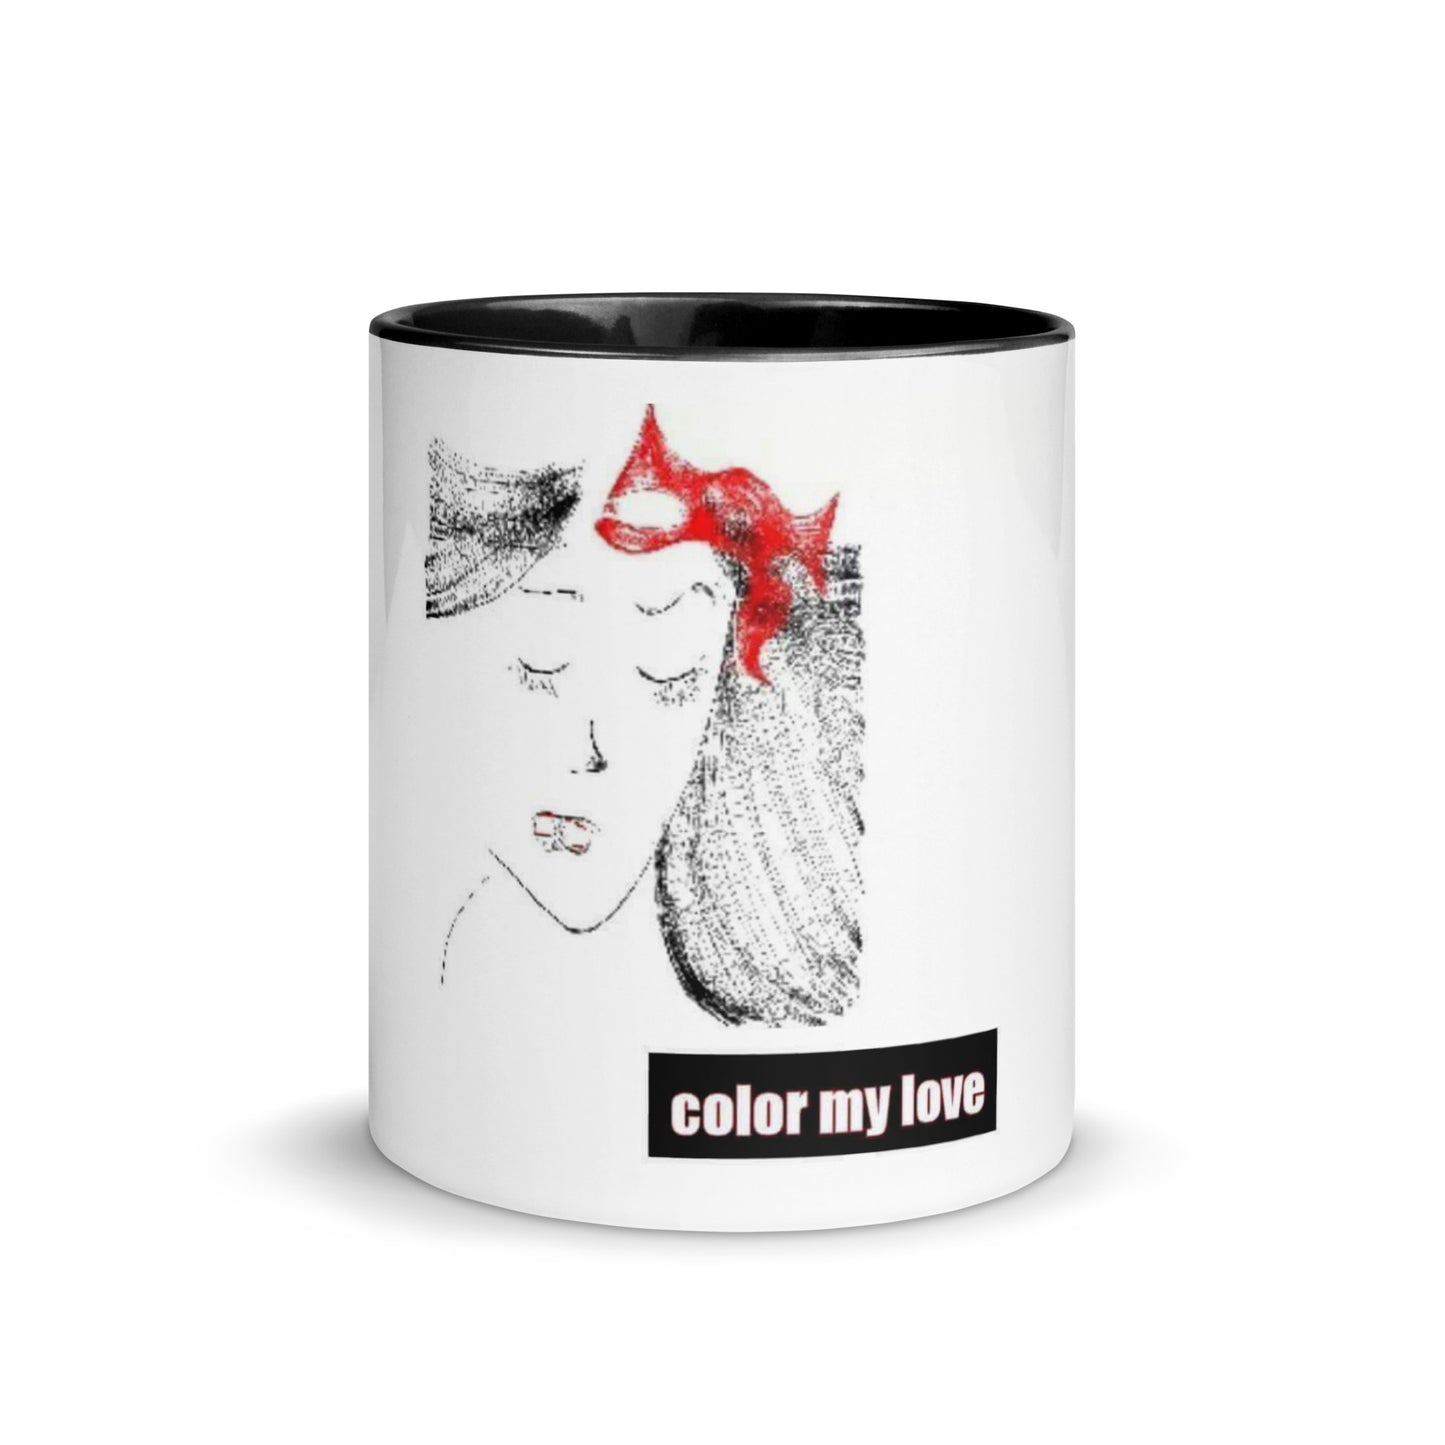 "Color My Love" Mug with Color Inside